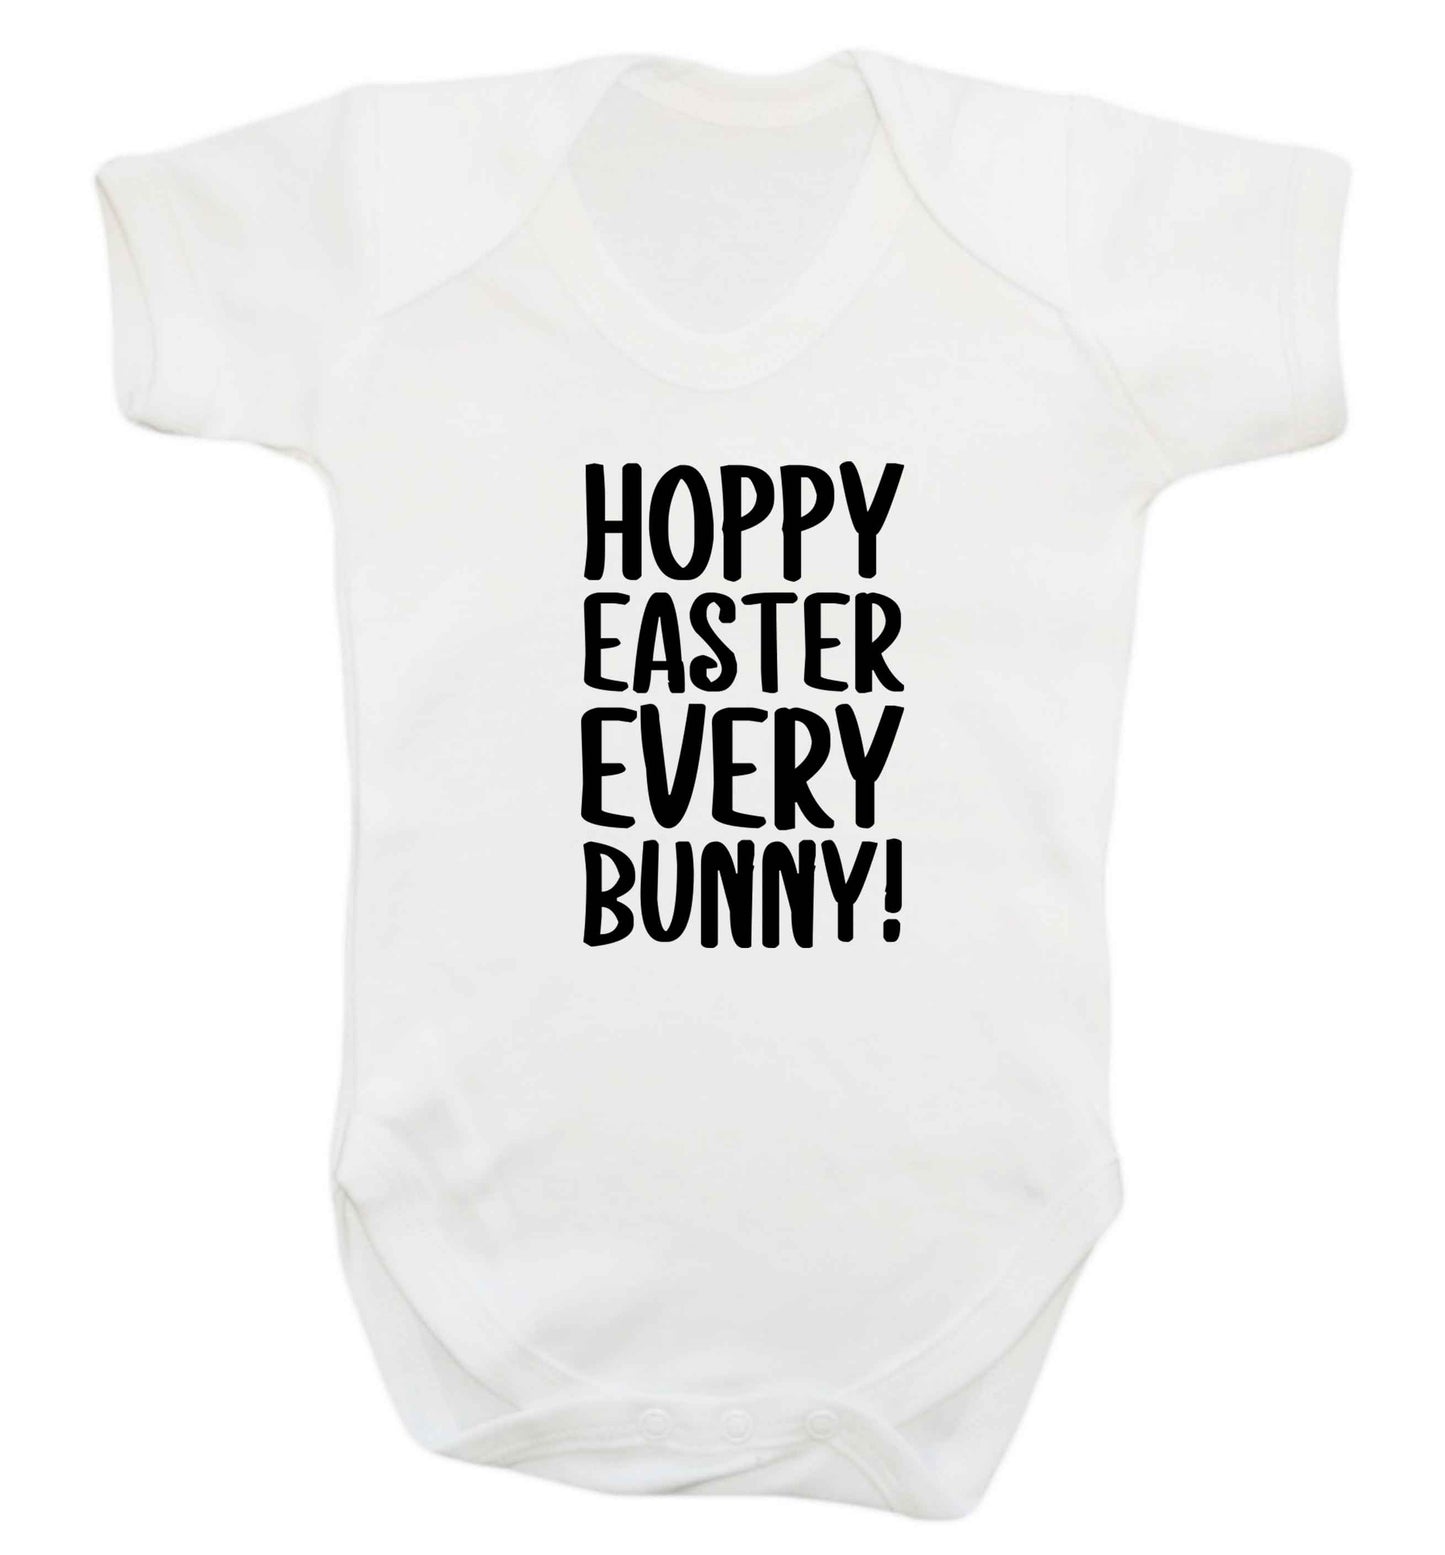 Hoppy Easter every bunny! baby vest white 18-24 months